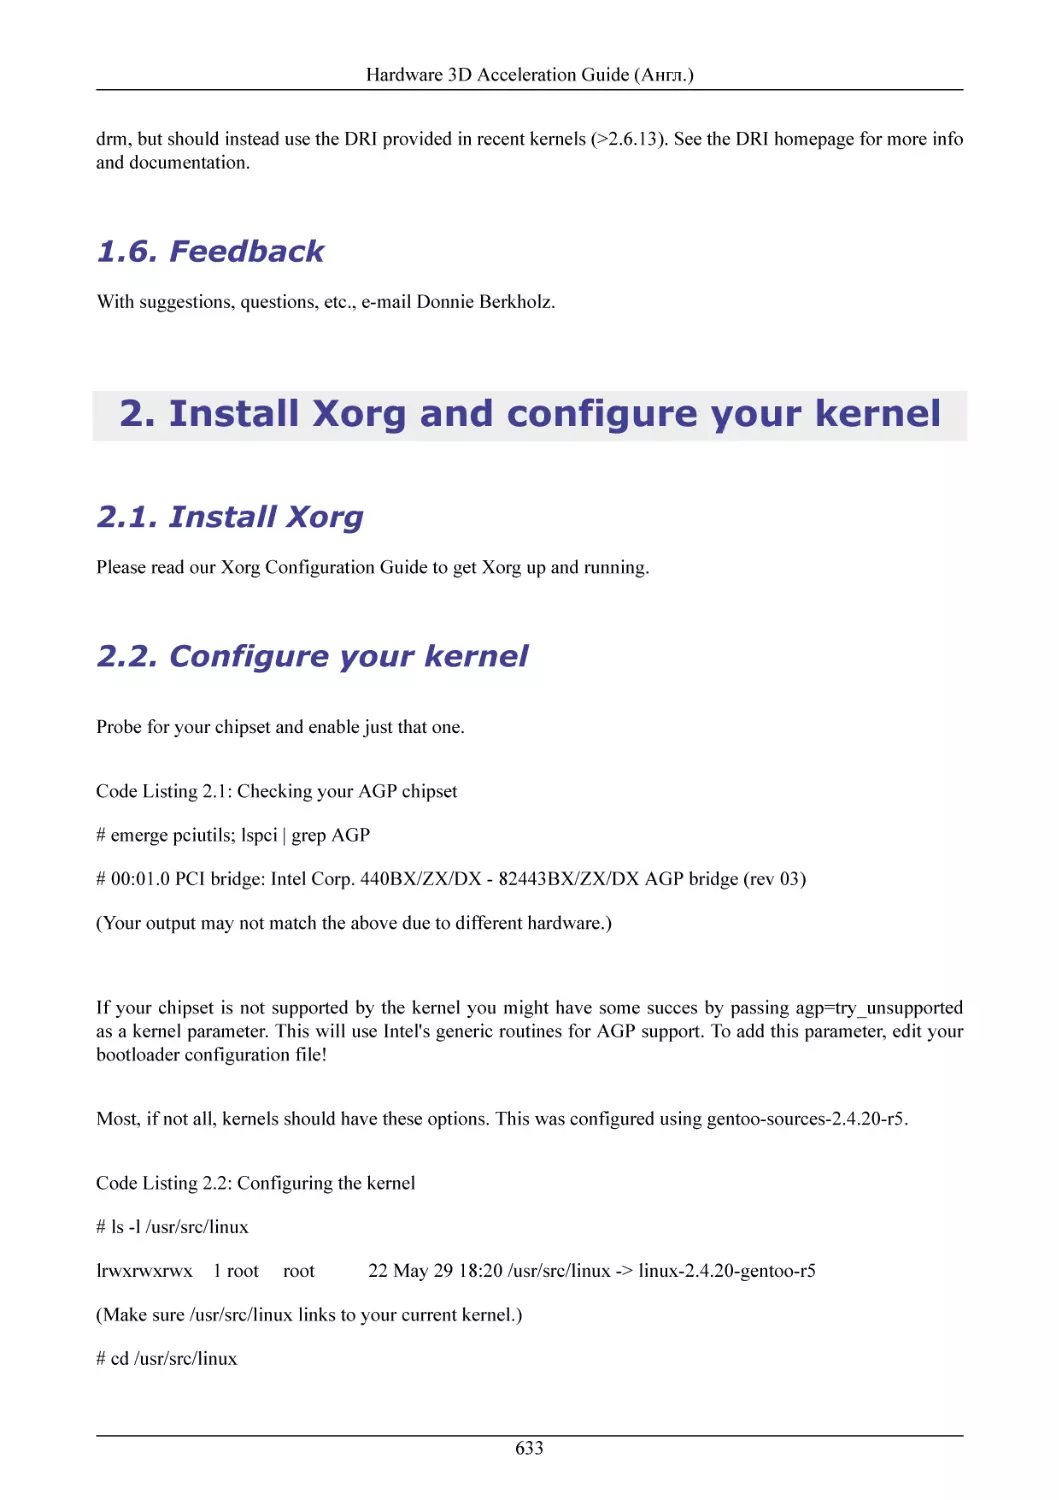 Feedback
Install Xorg and configure your kernel
Install Xorg
Configure your kernel